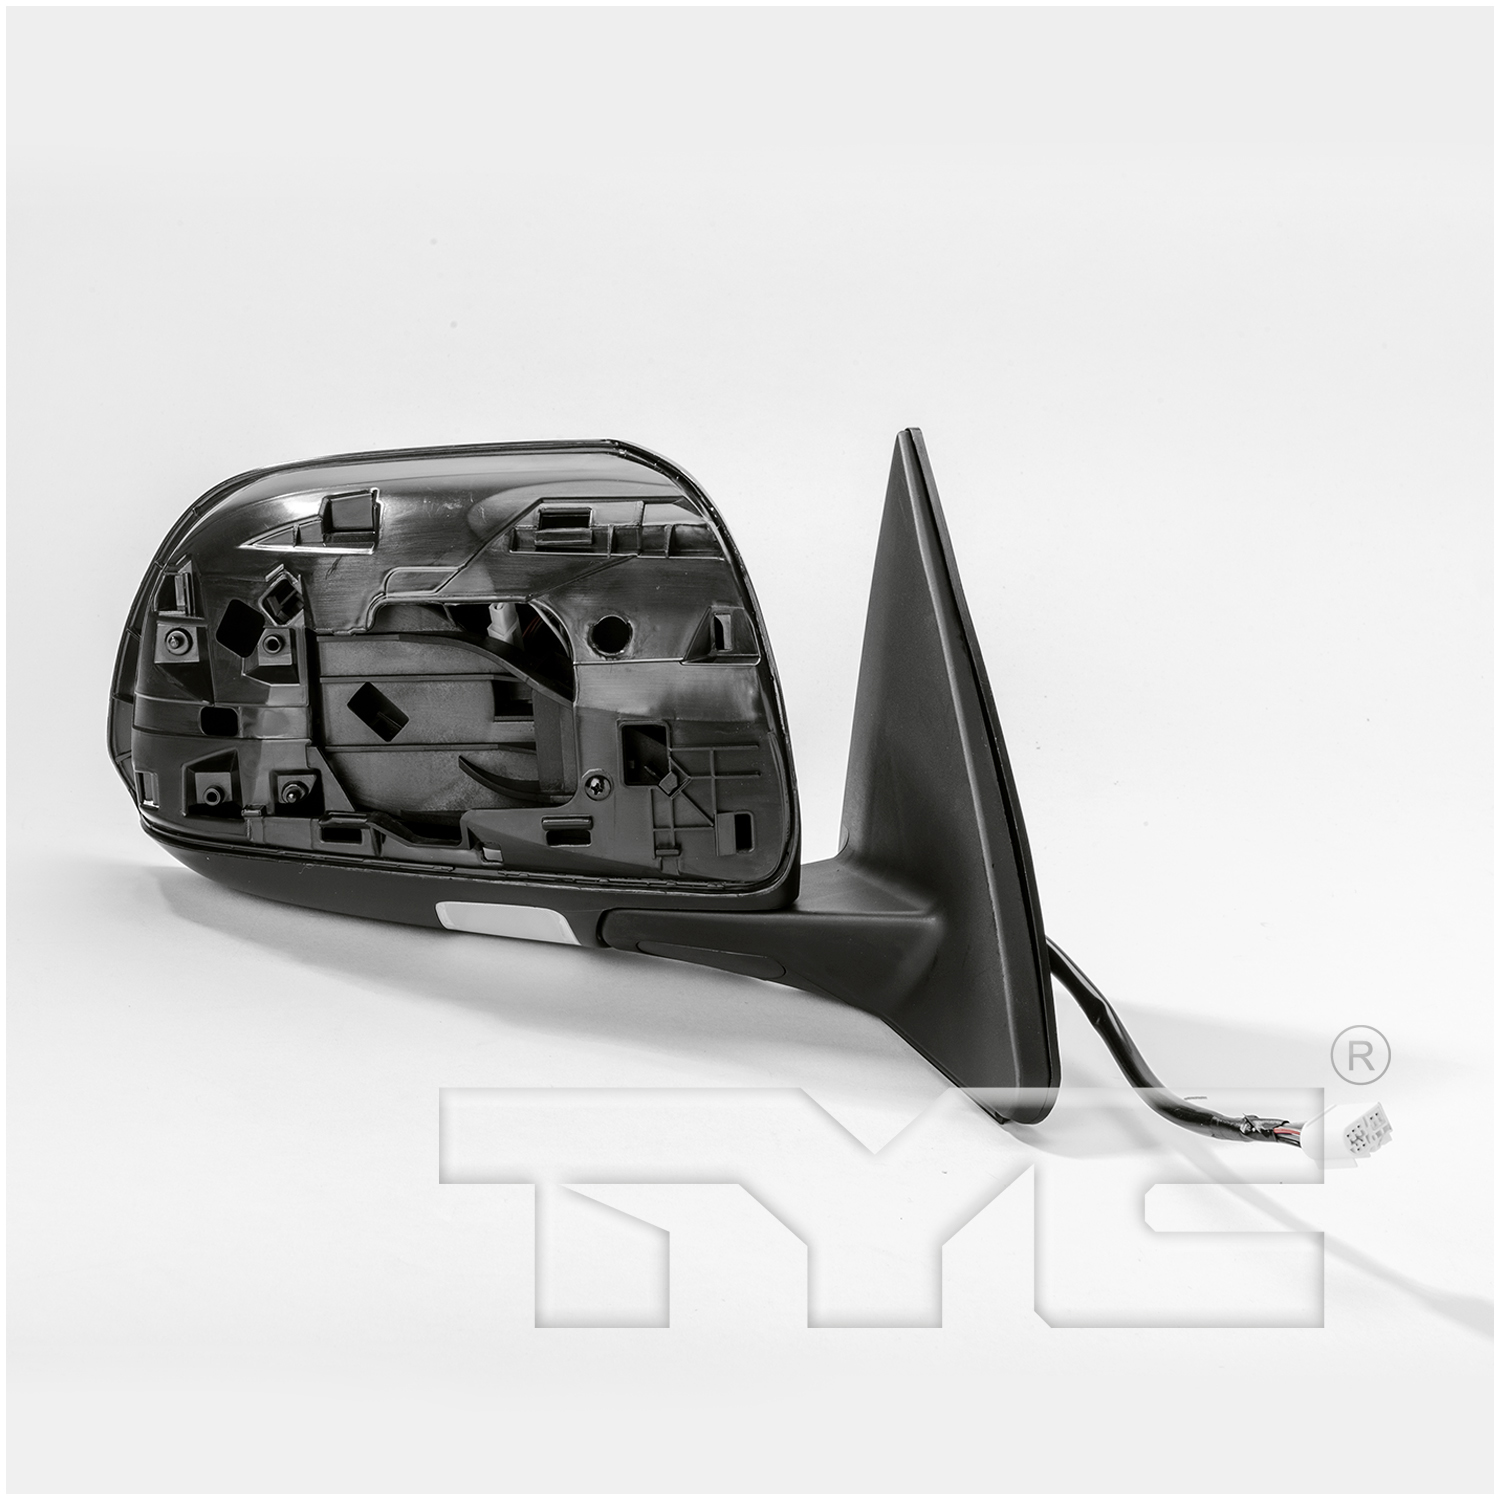 Aftermarket MIRRORS for TOYOTA - HIGHLANDER, HIGHLANDER,08-10,RT Mirror outside rear view